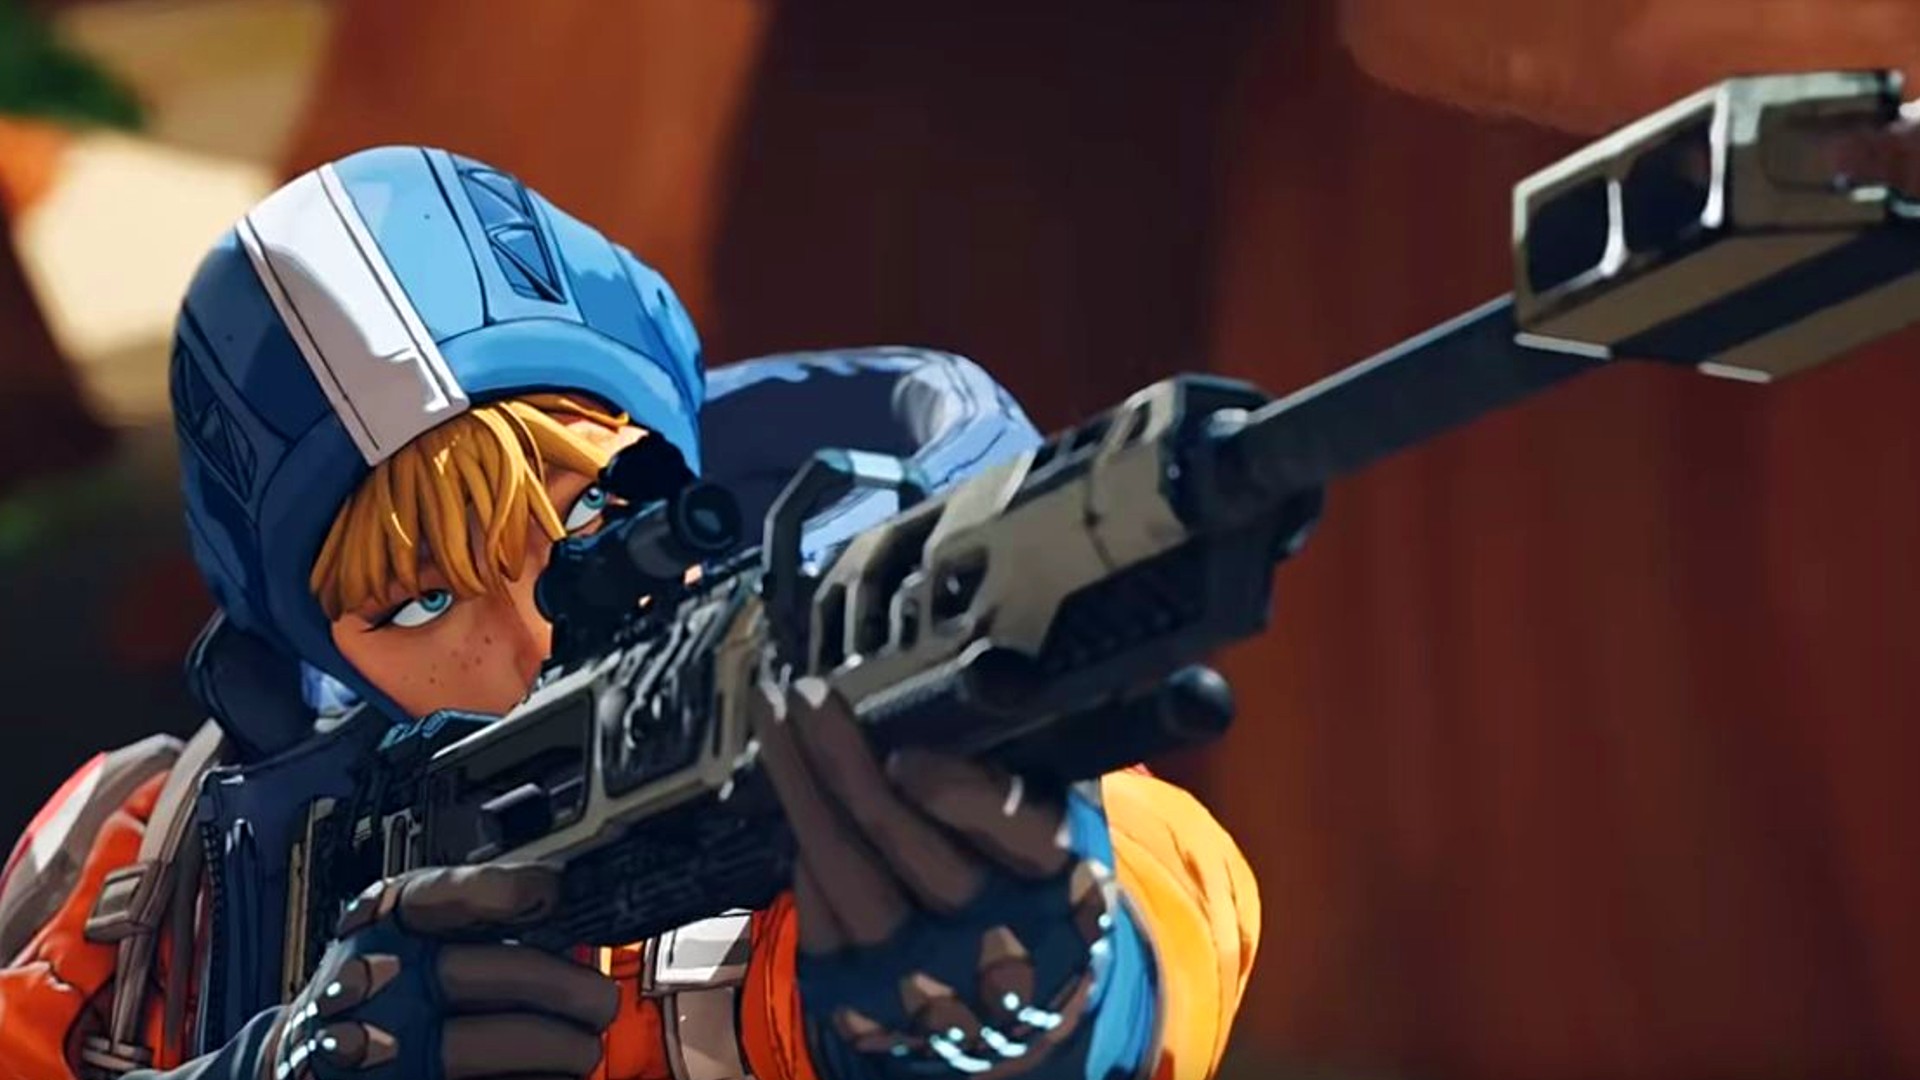 Apex Legends Mobile weapons tier list - All guns ranked from best to worst